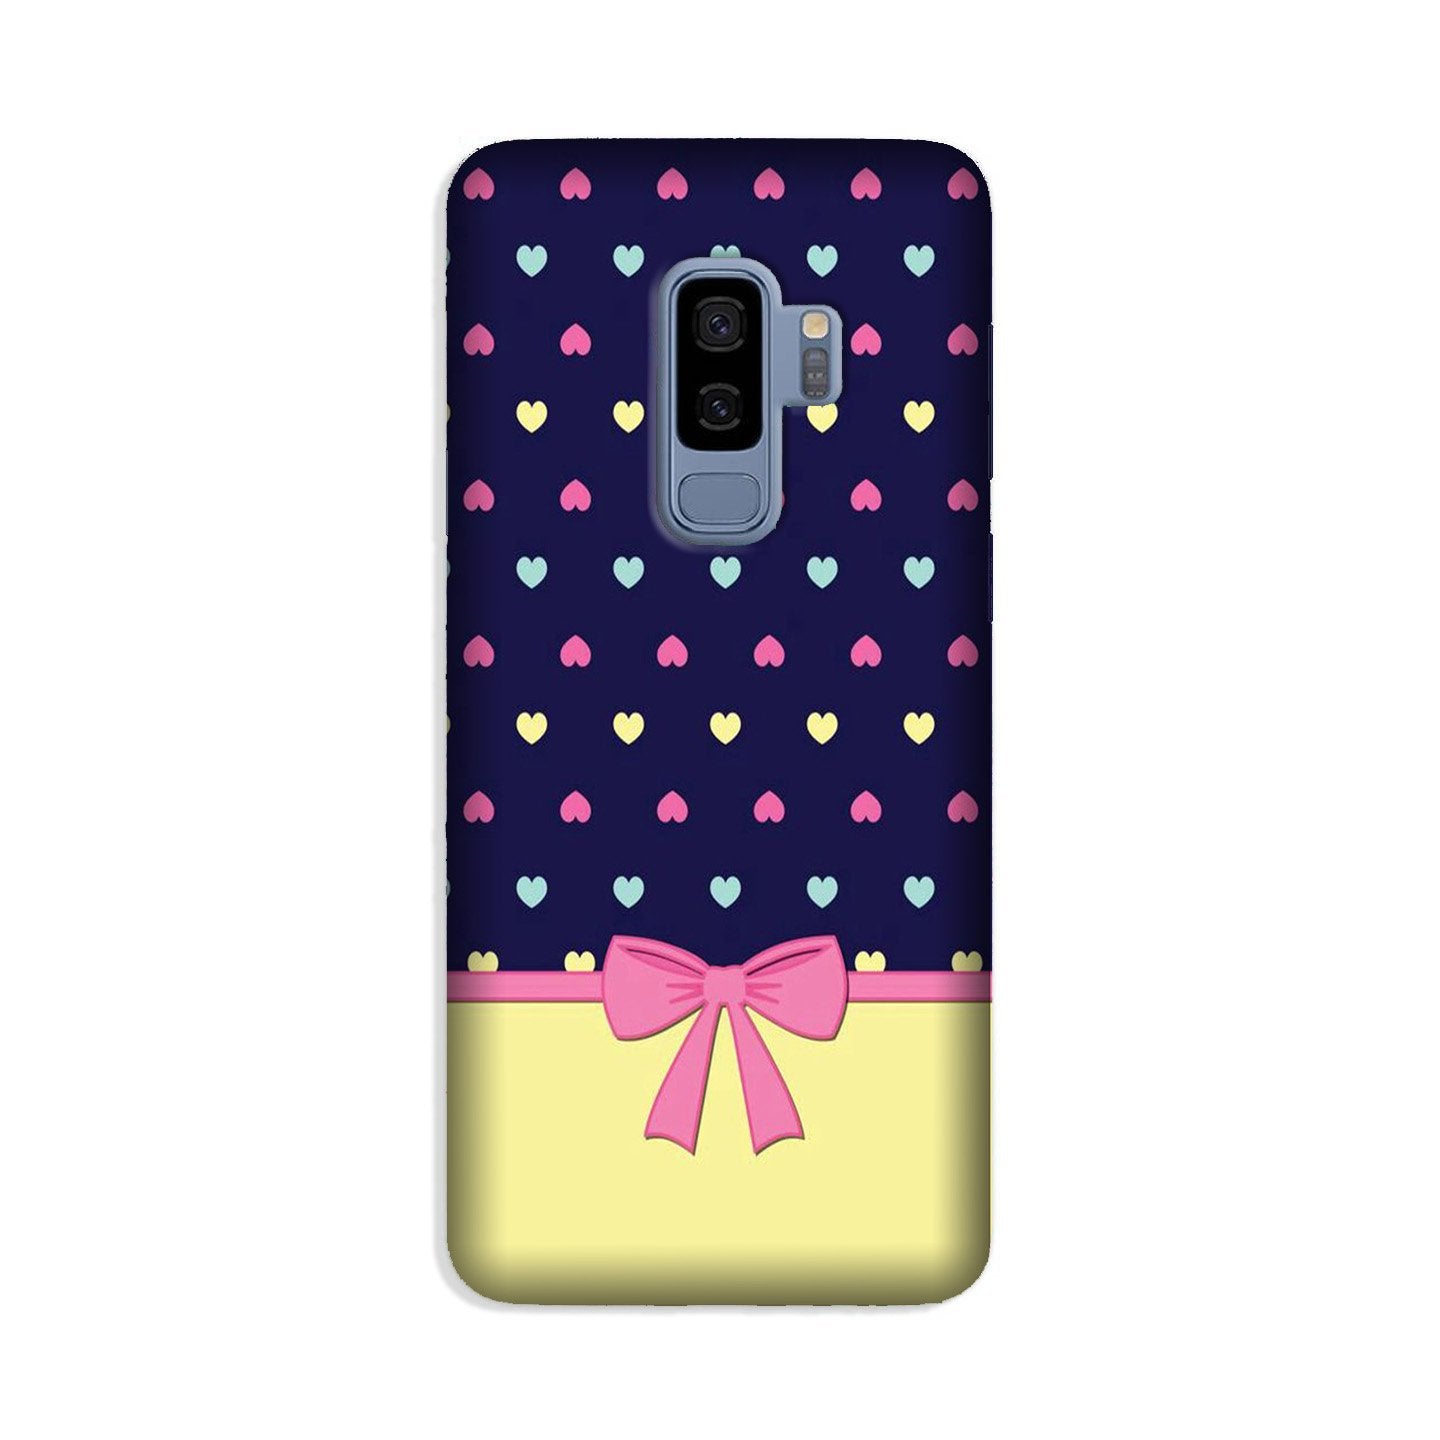 Gift Wrap5 Case for Galaxy S9 Plus